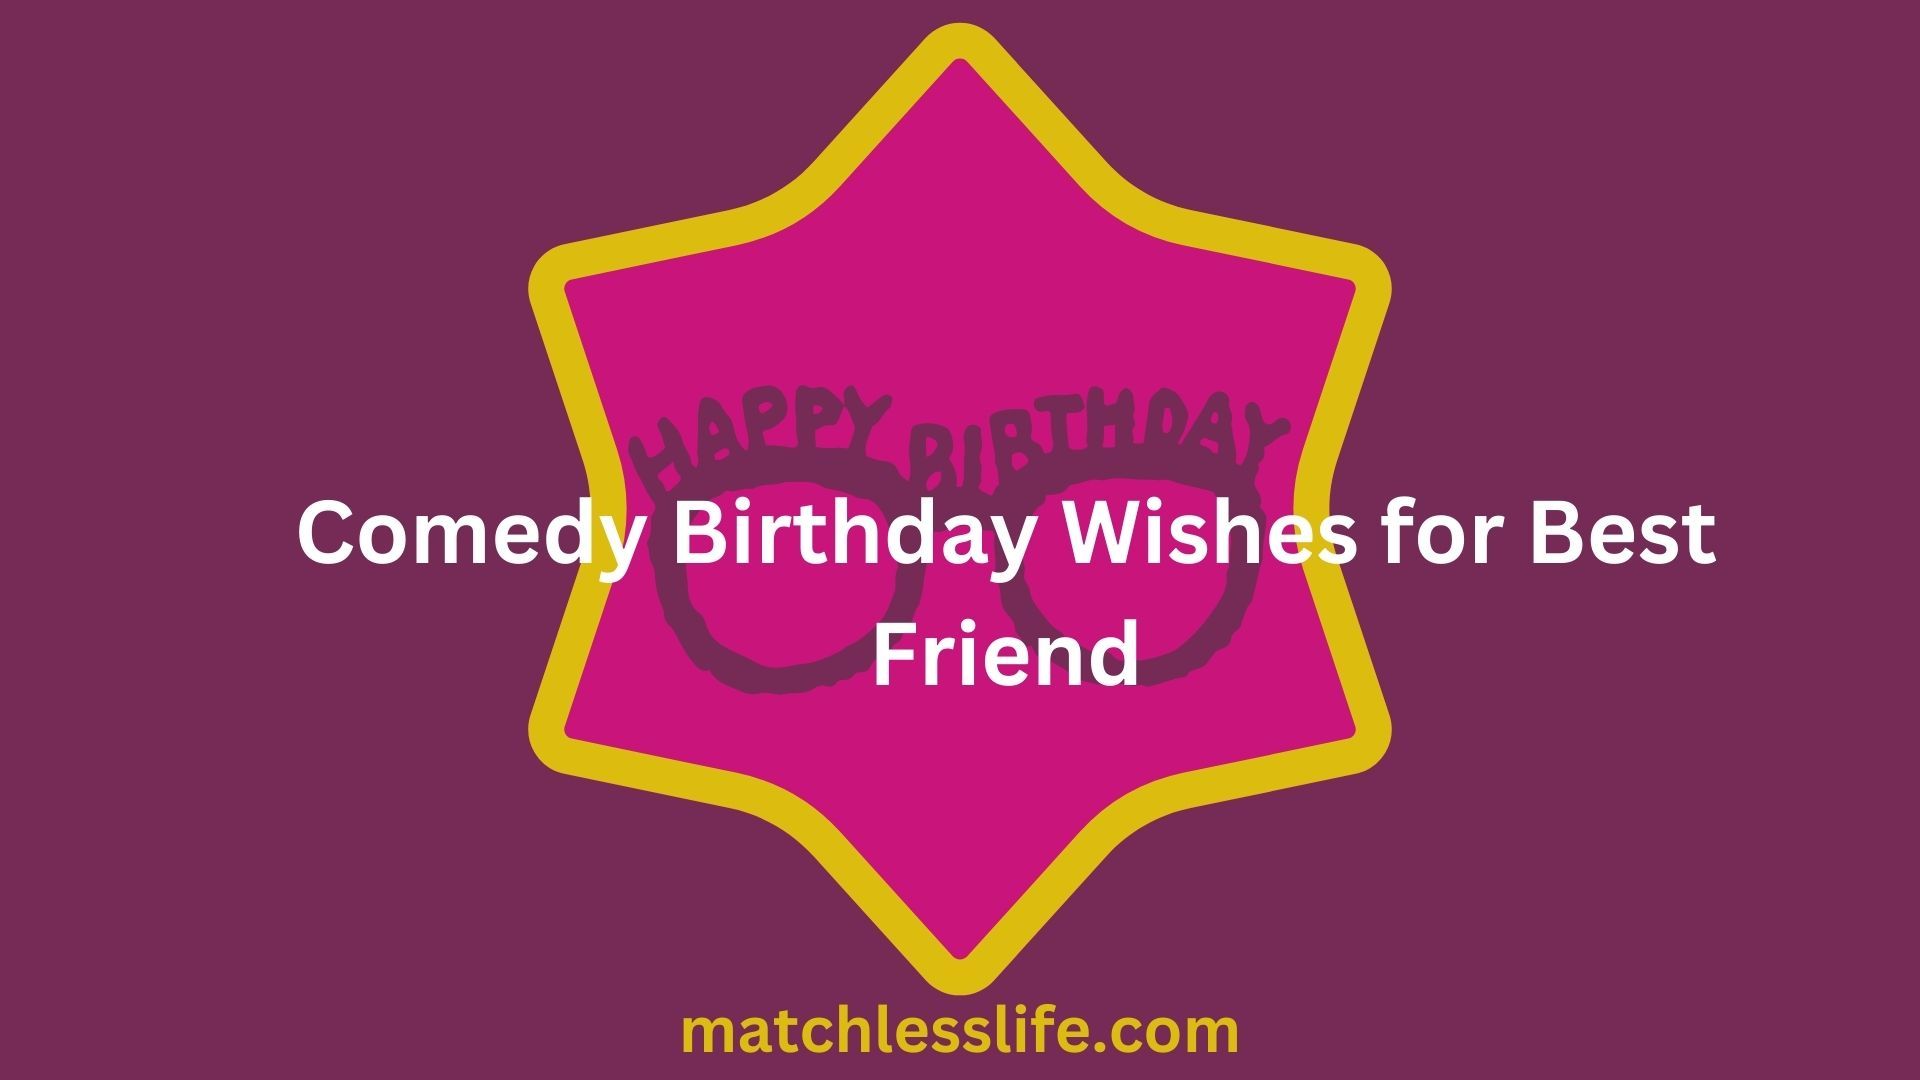 Comedy Birthday Wishes for Best Friend